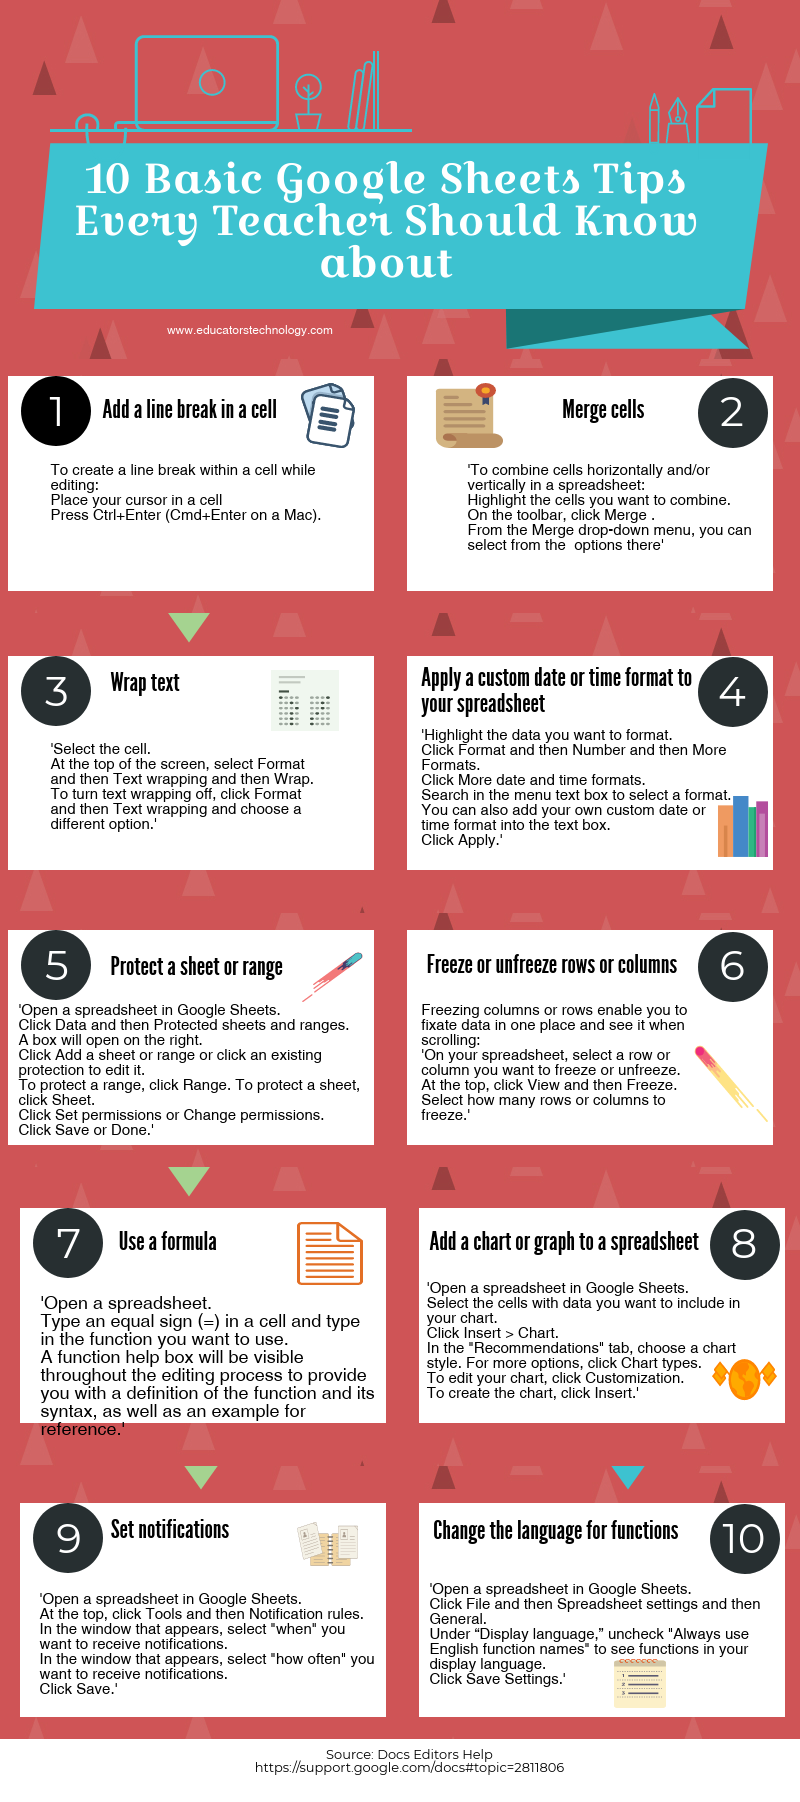 10 Basic Google Sheets Tips Every Teacher Should Know about